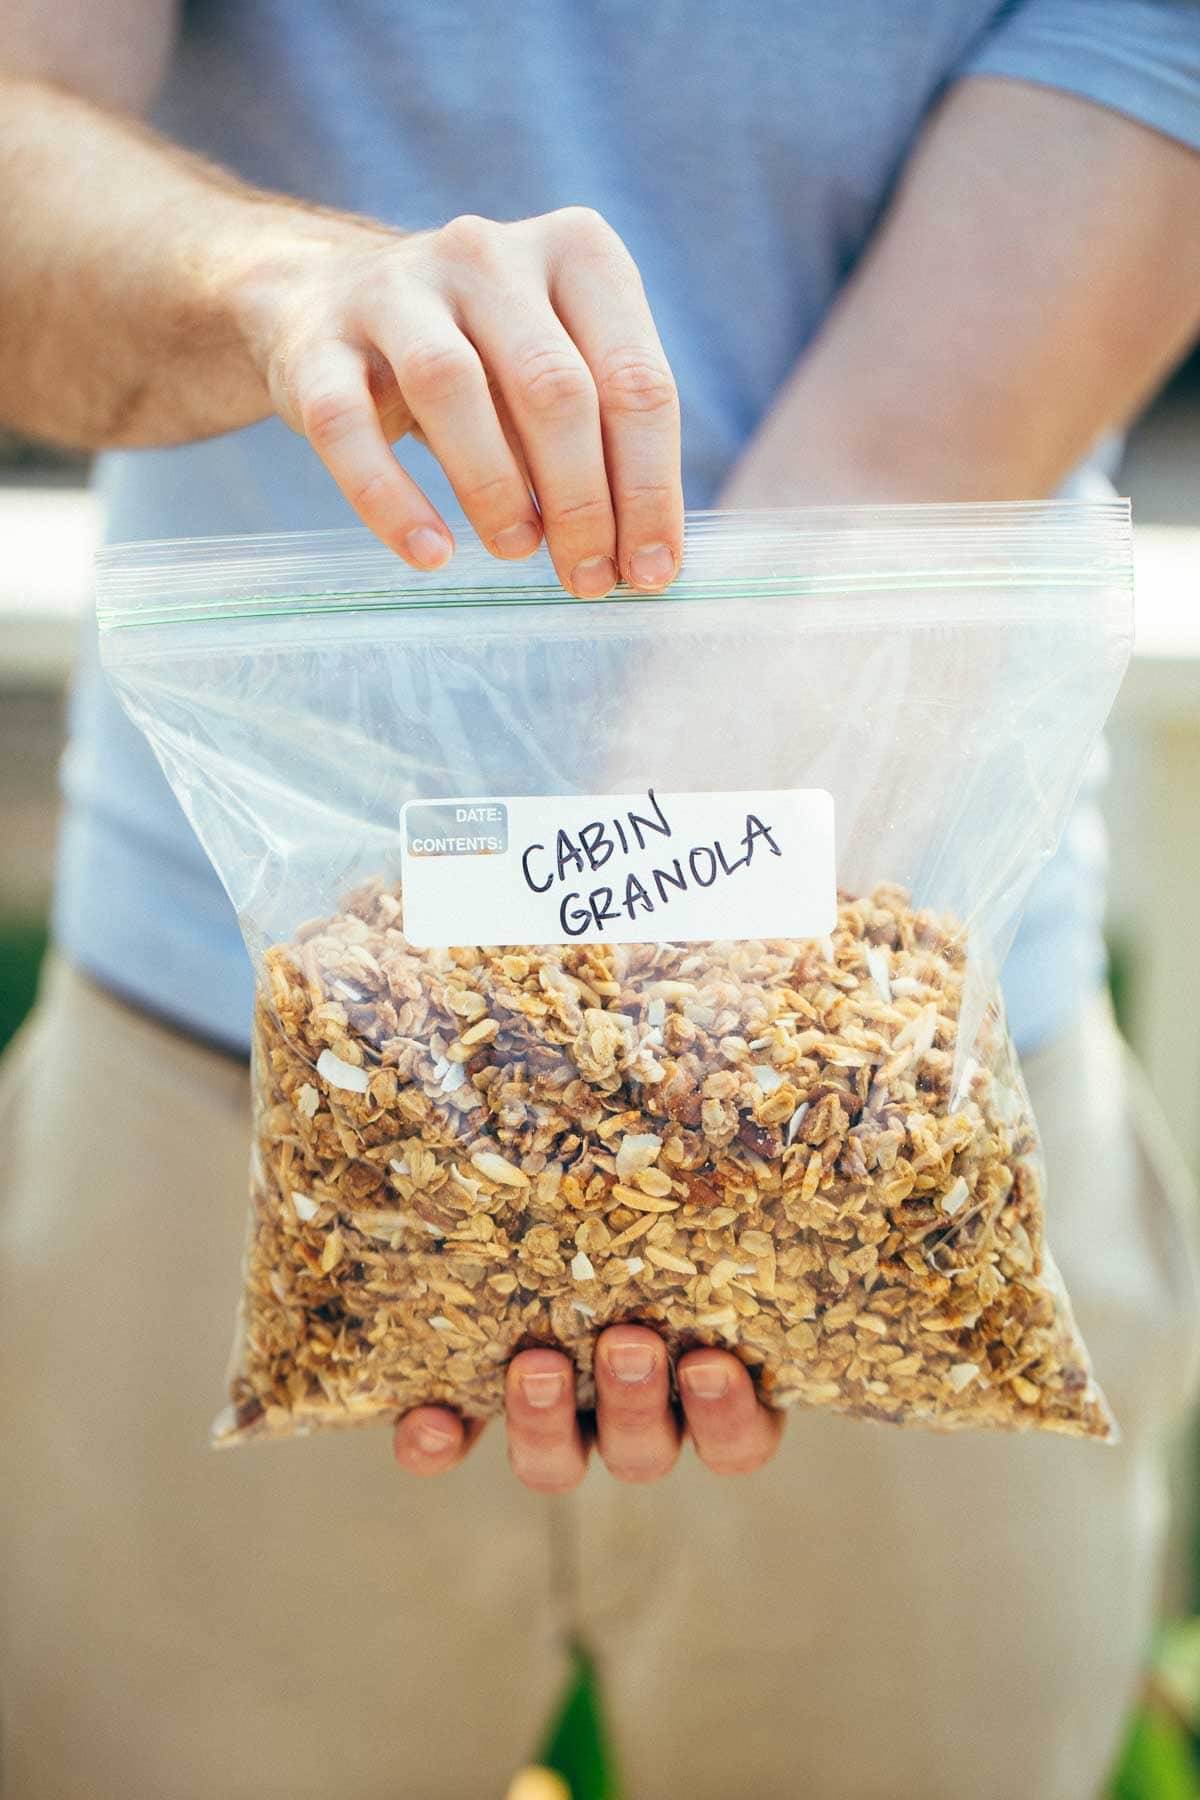 Perfect granola for taking along on summer vacation for easy, real food breakfasts! Made in 30 minutes. Simple and SO good! | pinchofyum.com